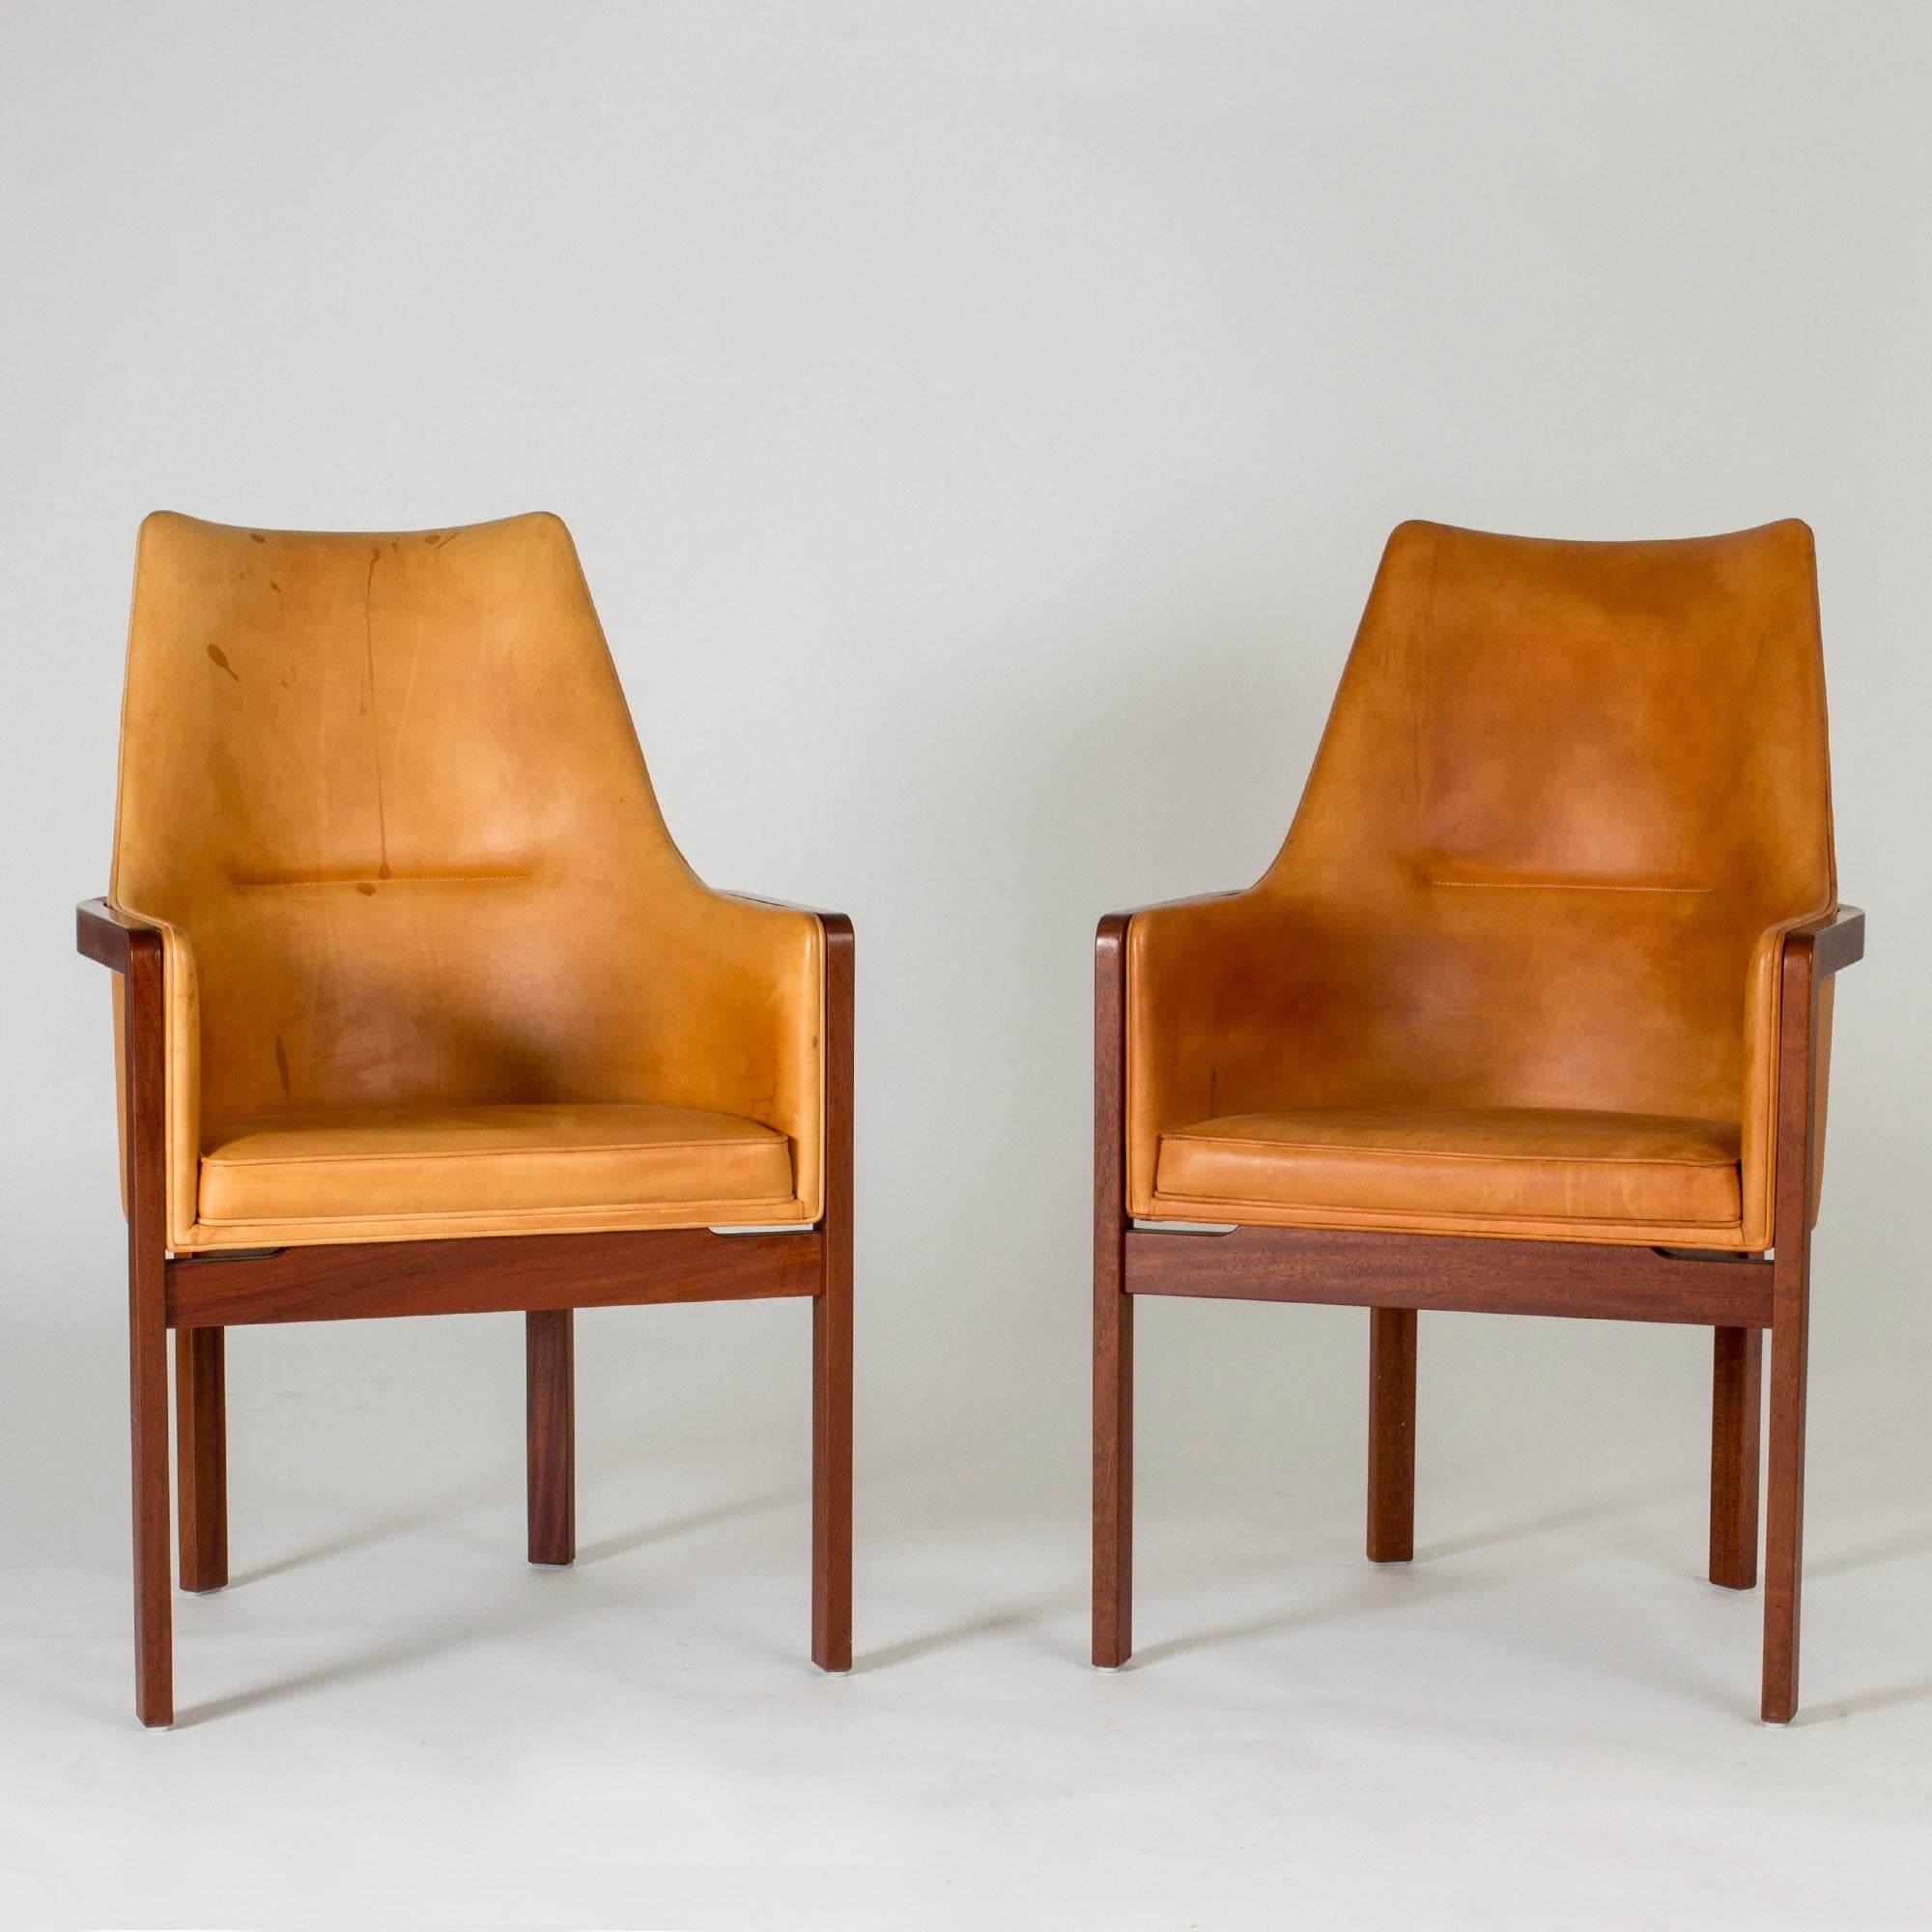 Pair of elegant armchairs by Bernt Petersen, with rosewood frames and comfortable natural leather seats and backs. Smooth lines with nicely contrasting materials. Leather in very good condition, but with some patina.